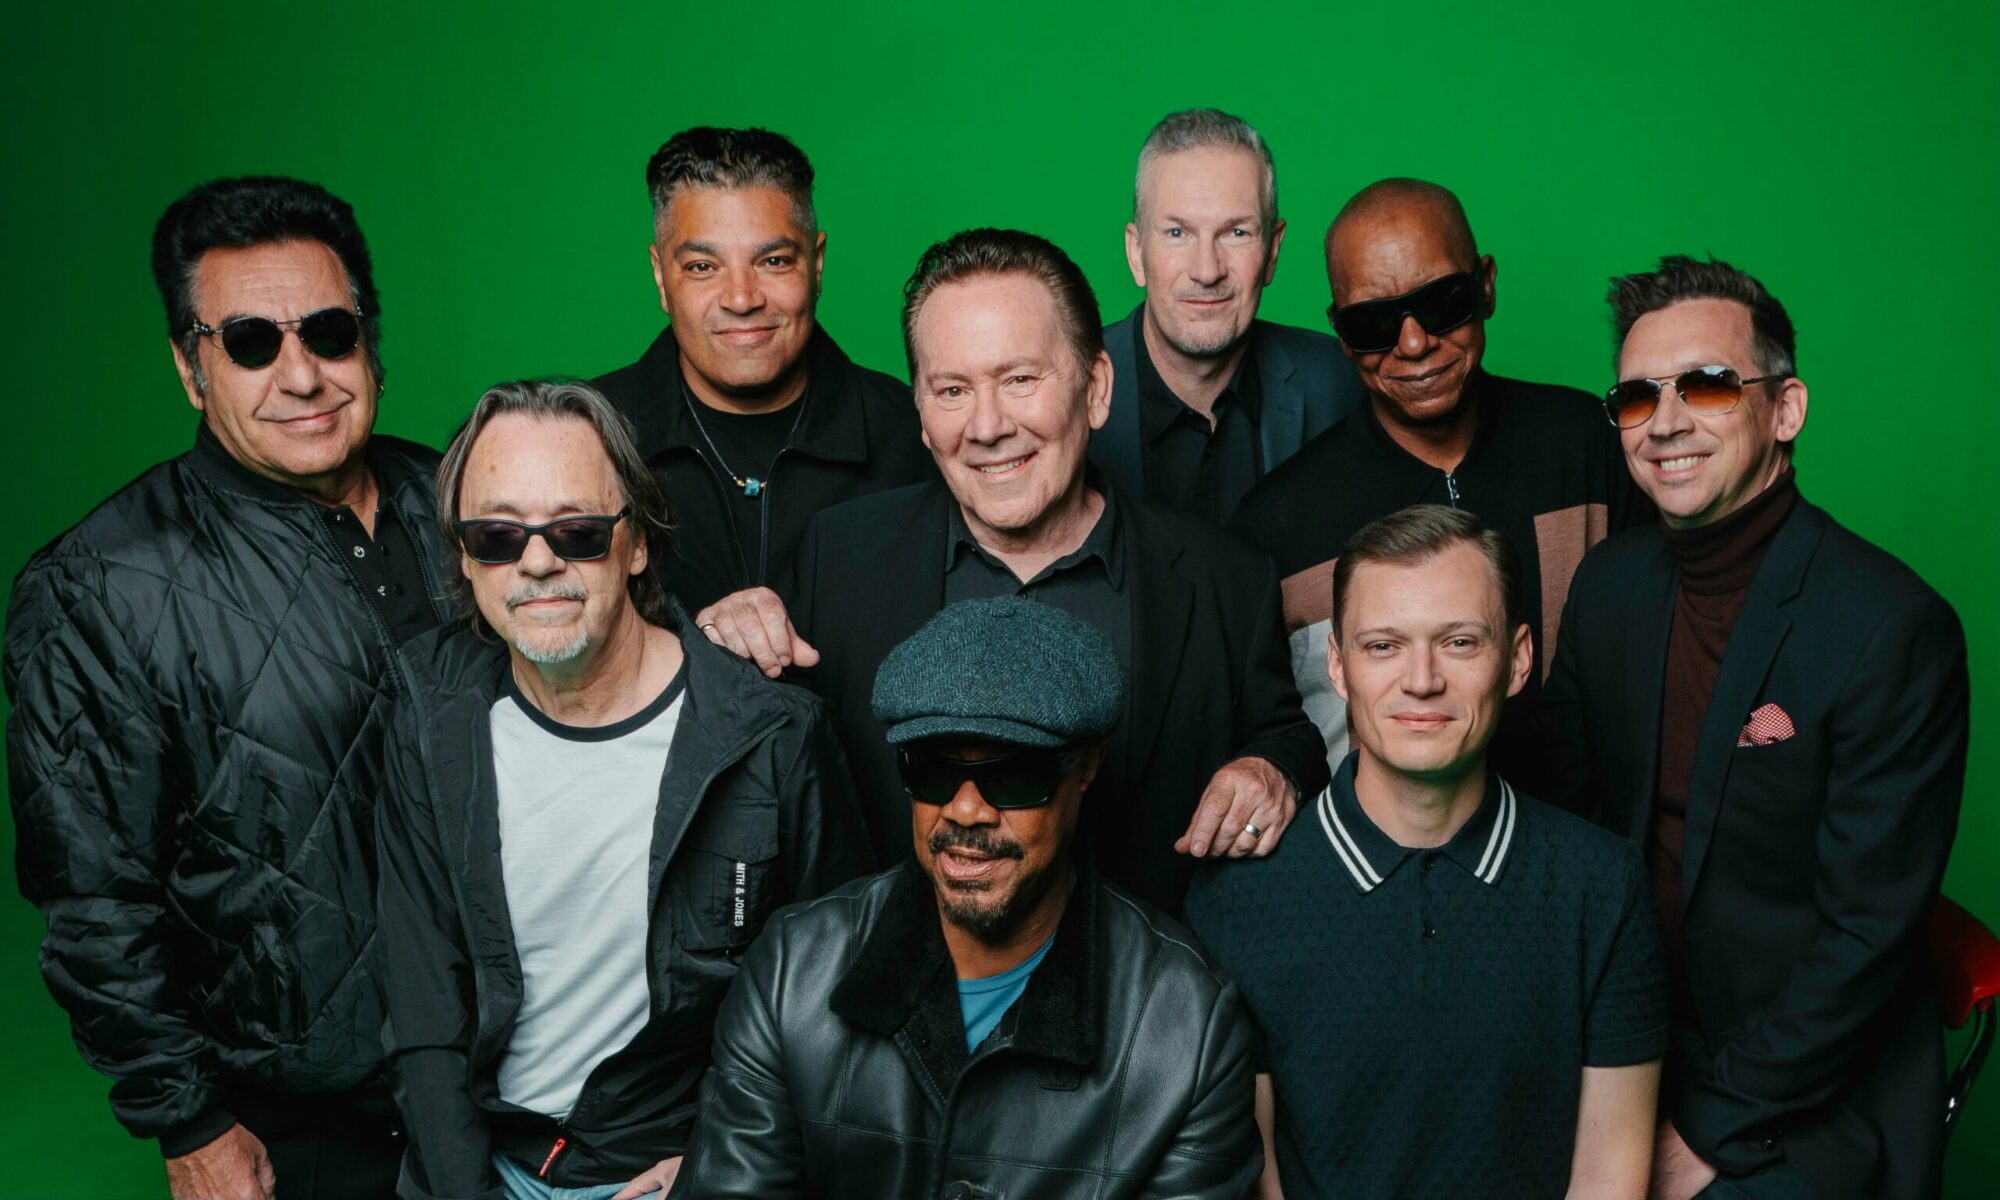 Image name UB40 Soul II Soul at First Direct Arena Leeds scaled the 1 image from the post UB40 & Soul II Soul at First Direct Arena, Leeds in Yorkshire.com.